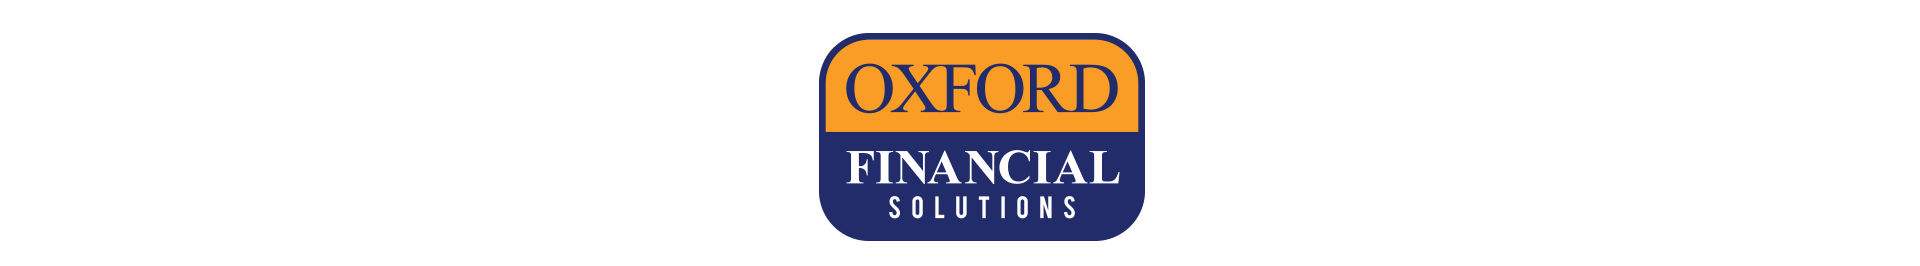     Welcome to Oxford Financial Solutions